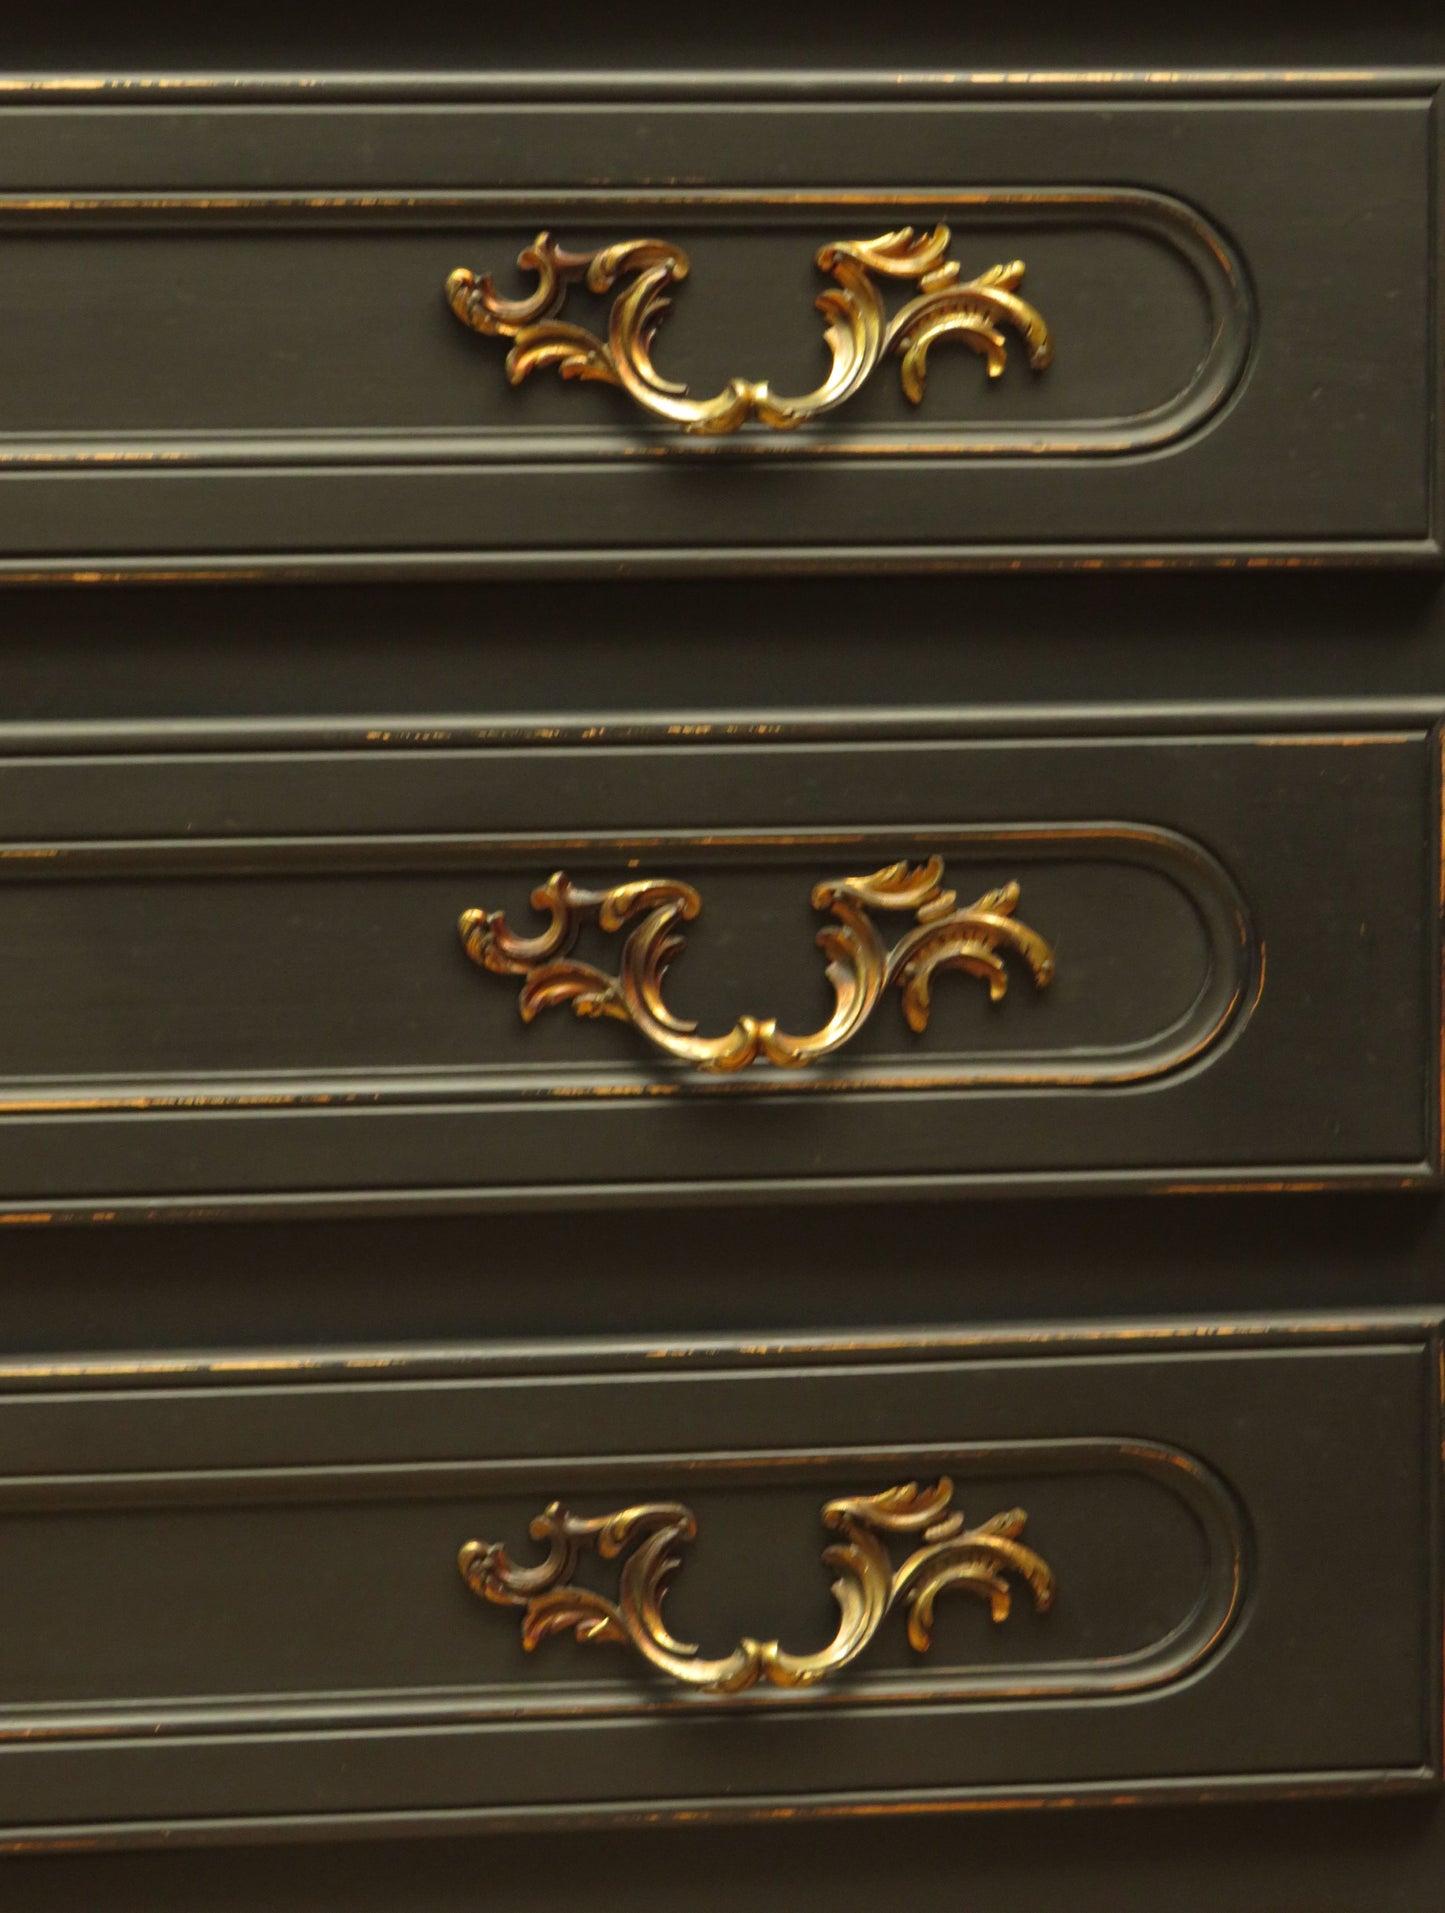 French Black Painted Chest of Drawers with Wooden Top